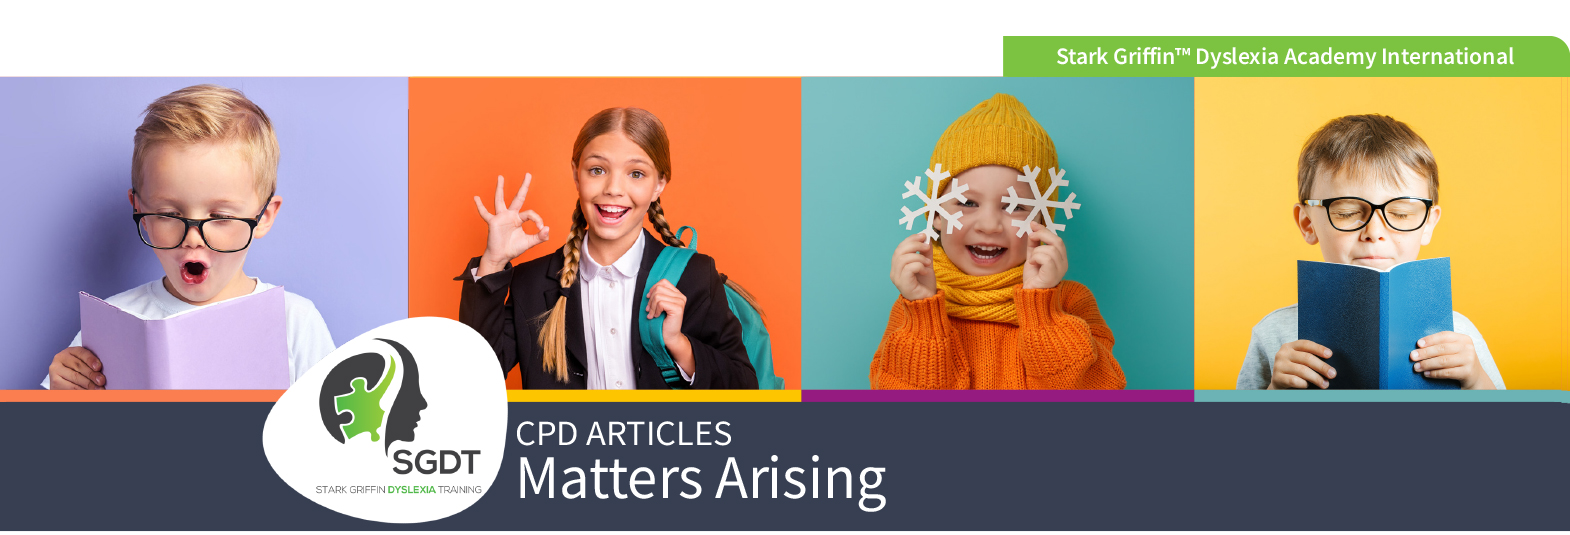 CPD Articles - Matters Arising